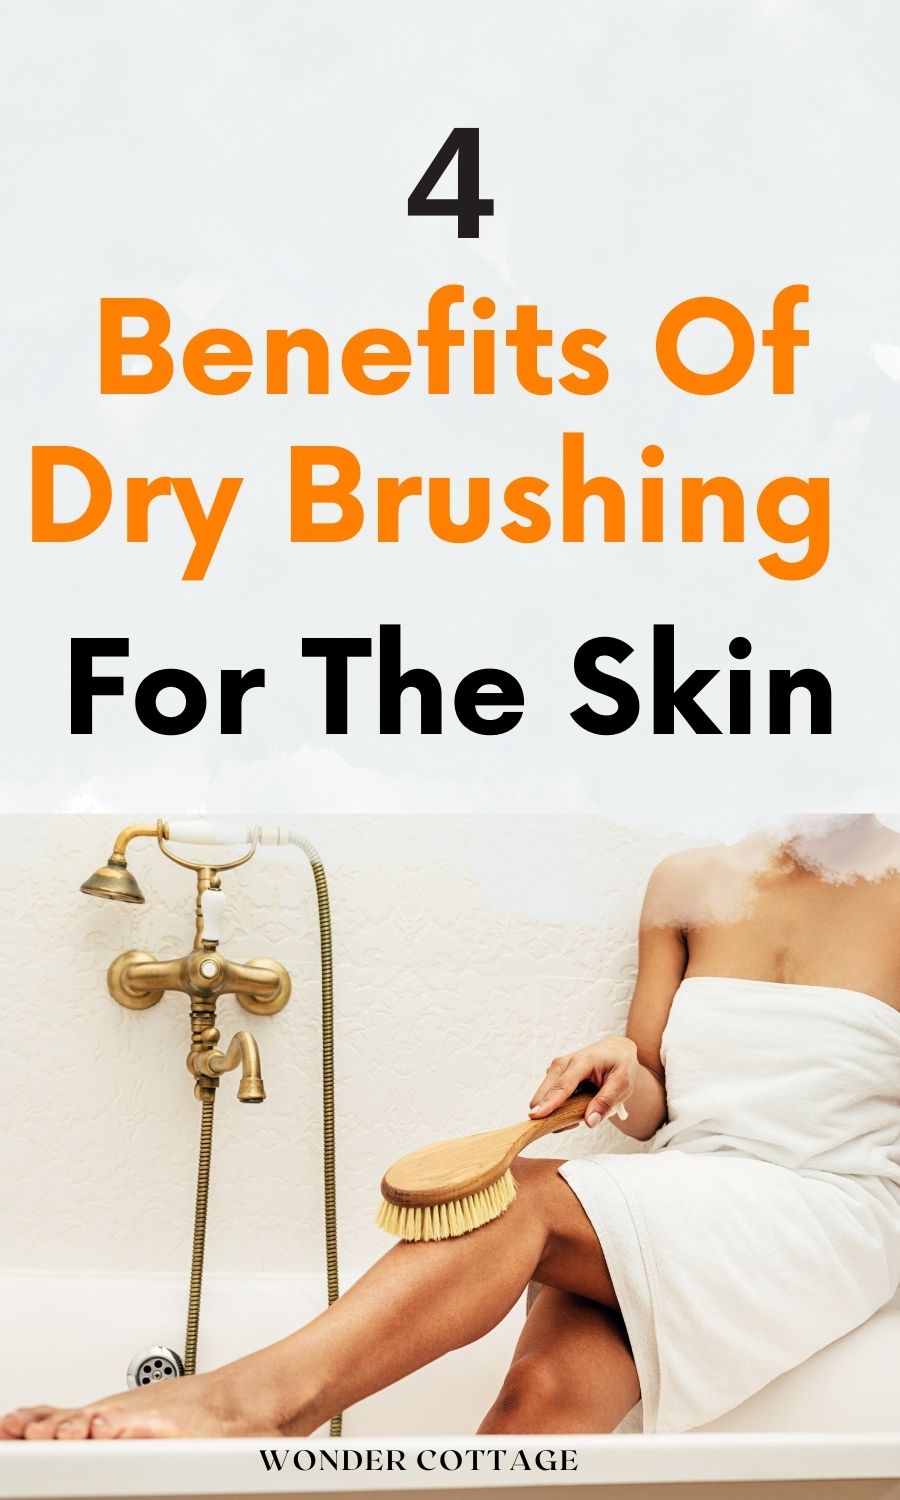 Benefits of dry brushing for the skin